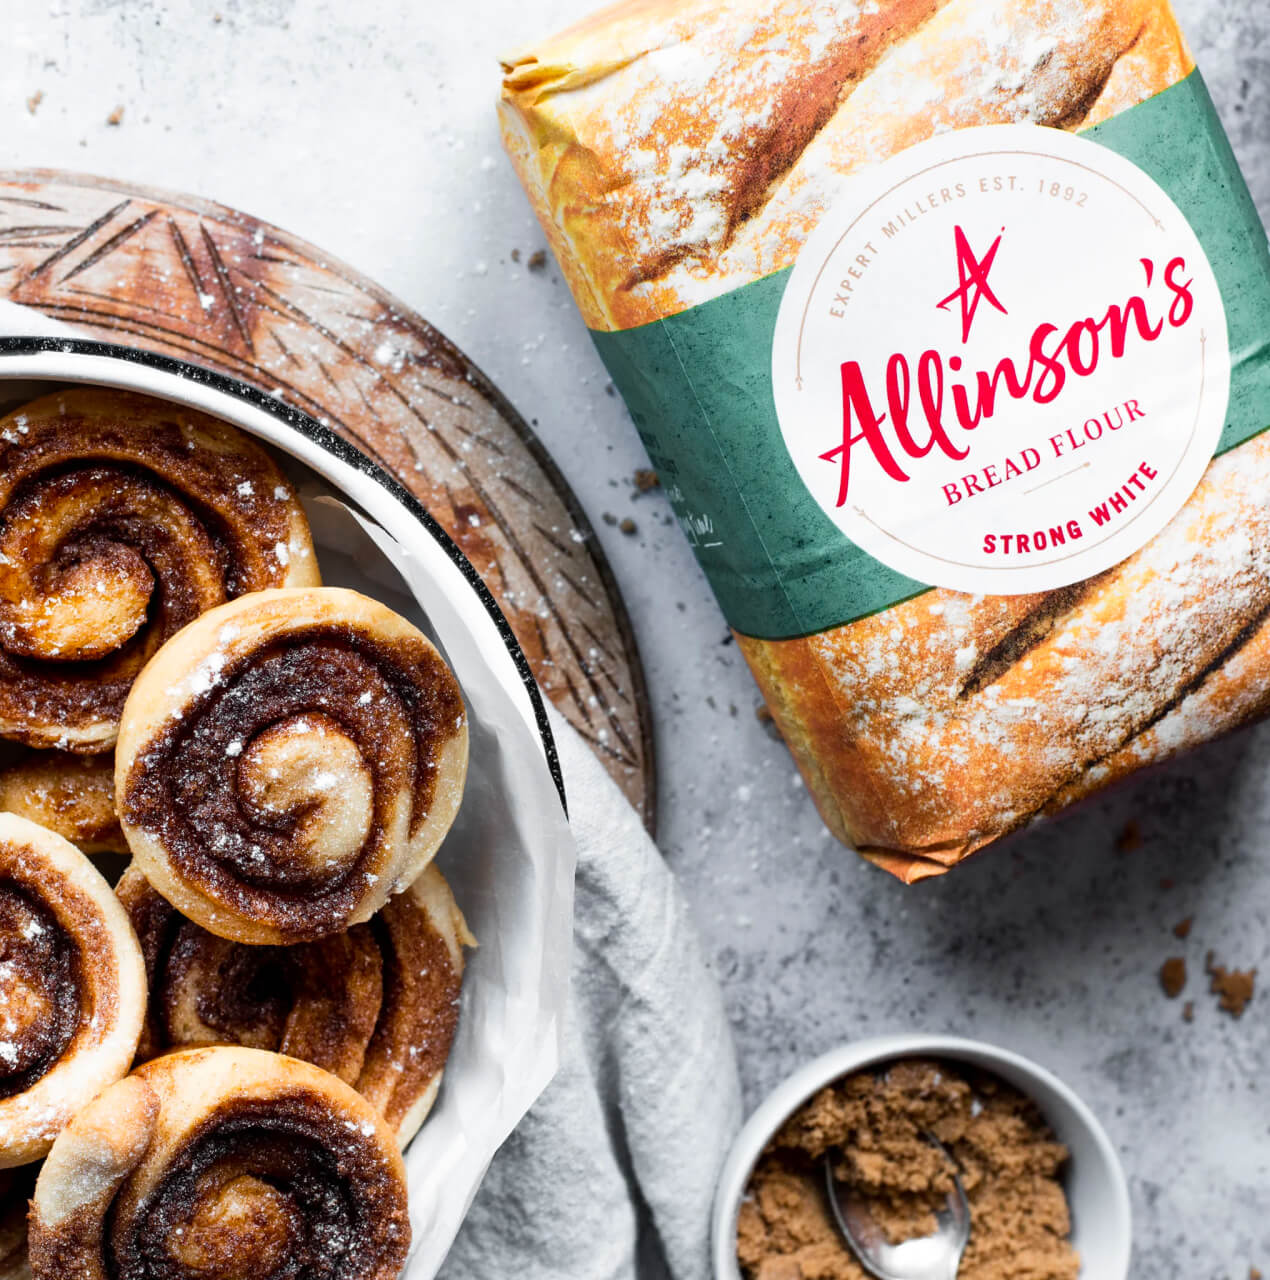 A pack of Allinson's Strong White Bread Flour alongside a plate of home made cinammon rolls.